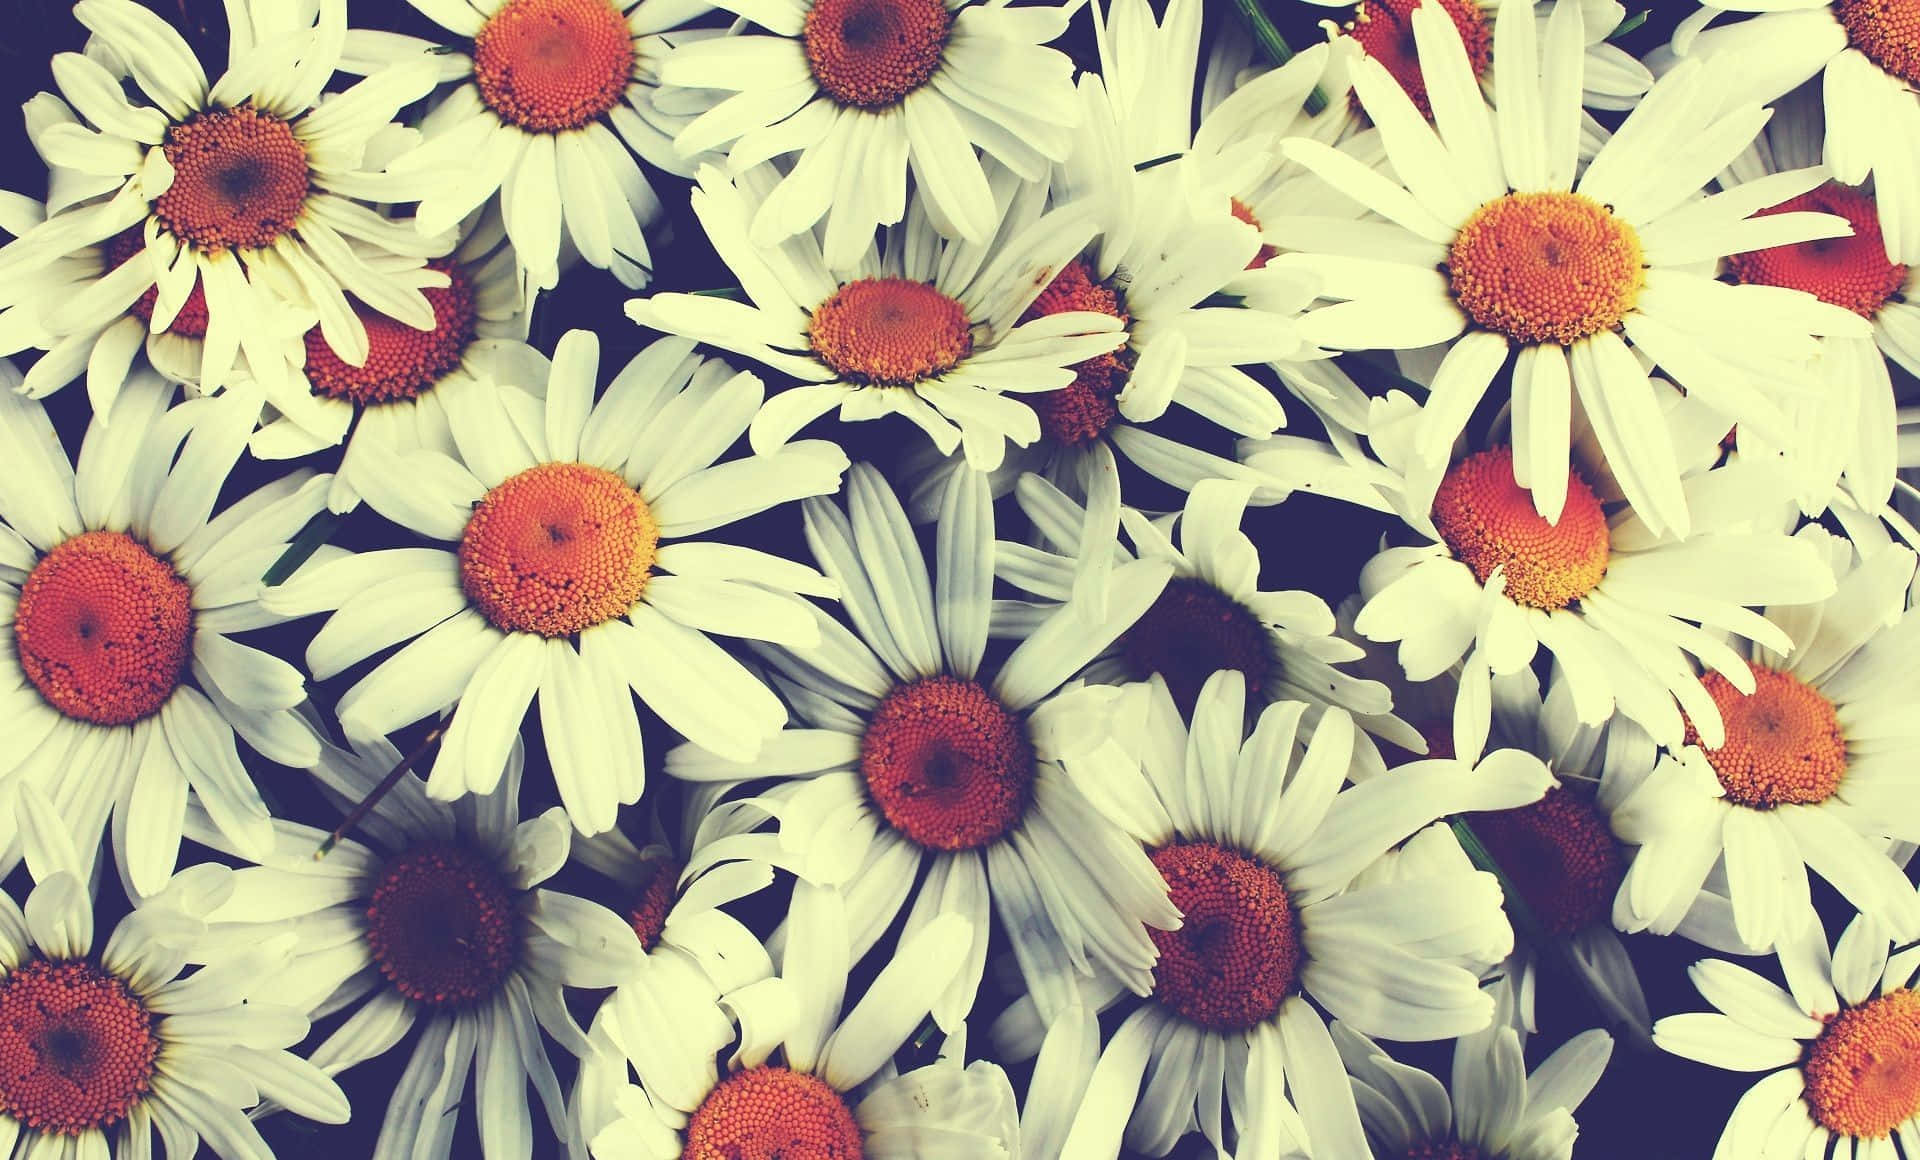 a close up of white daisies with orange centers